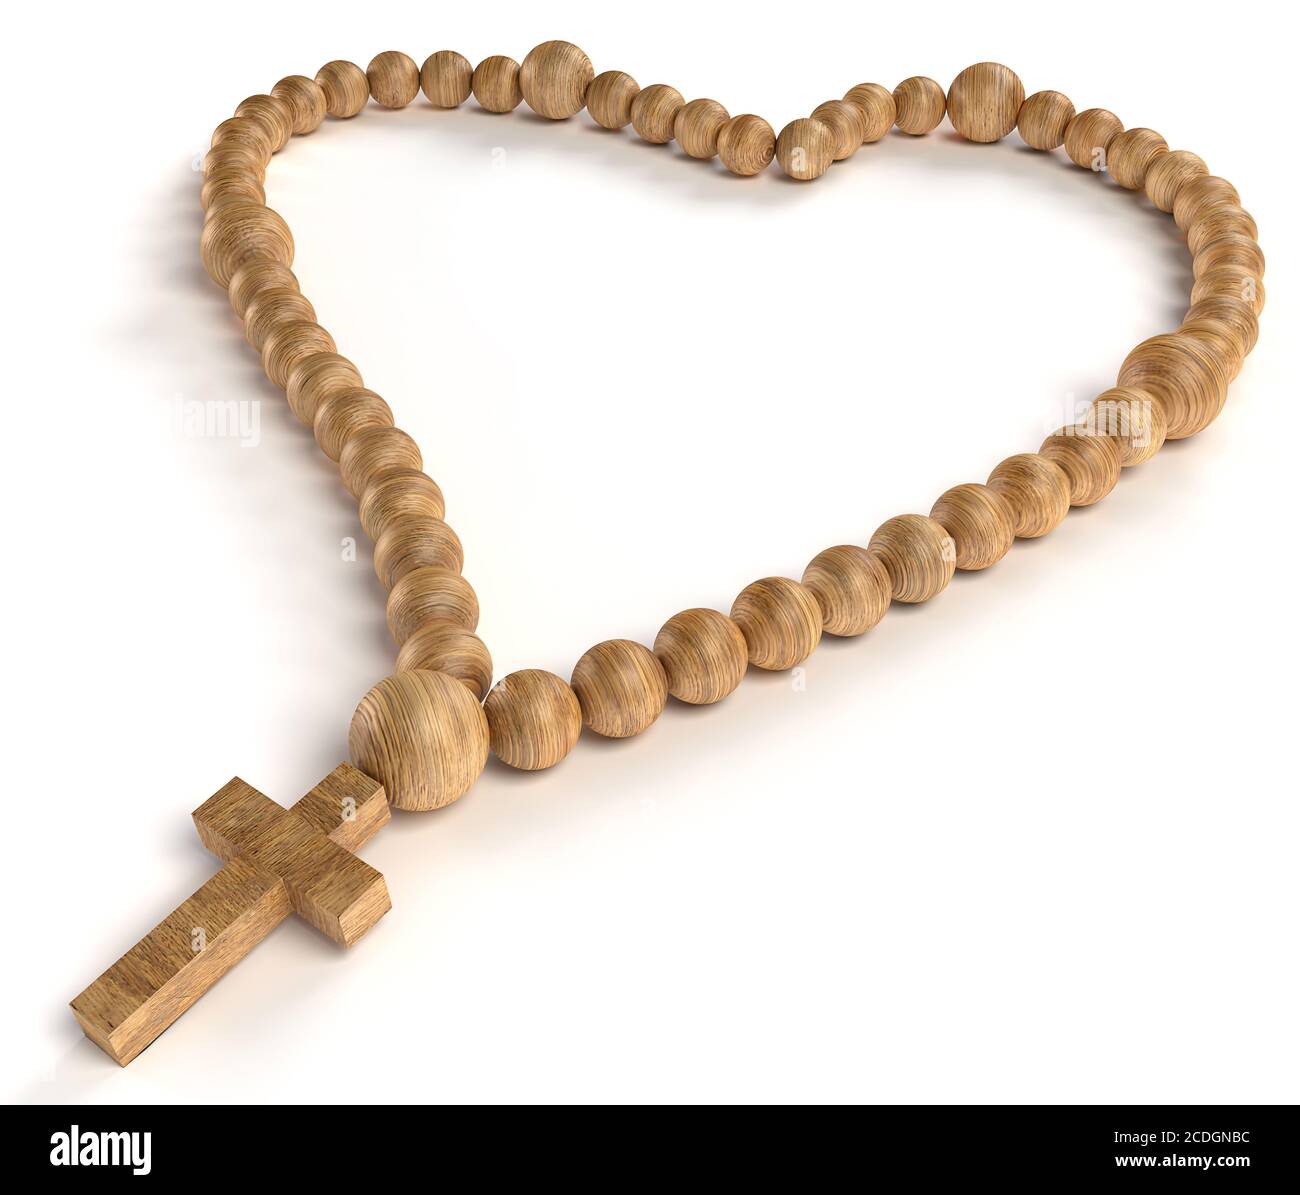 religious life and love: wooden chaplet or rosary beads Stock Photo